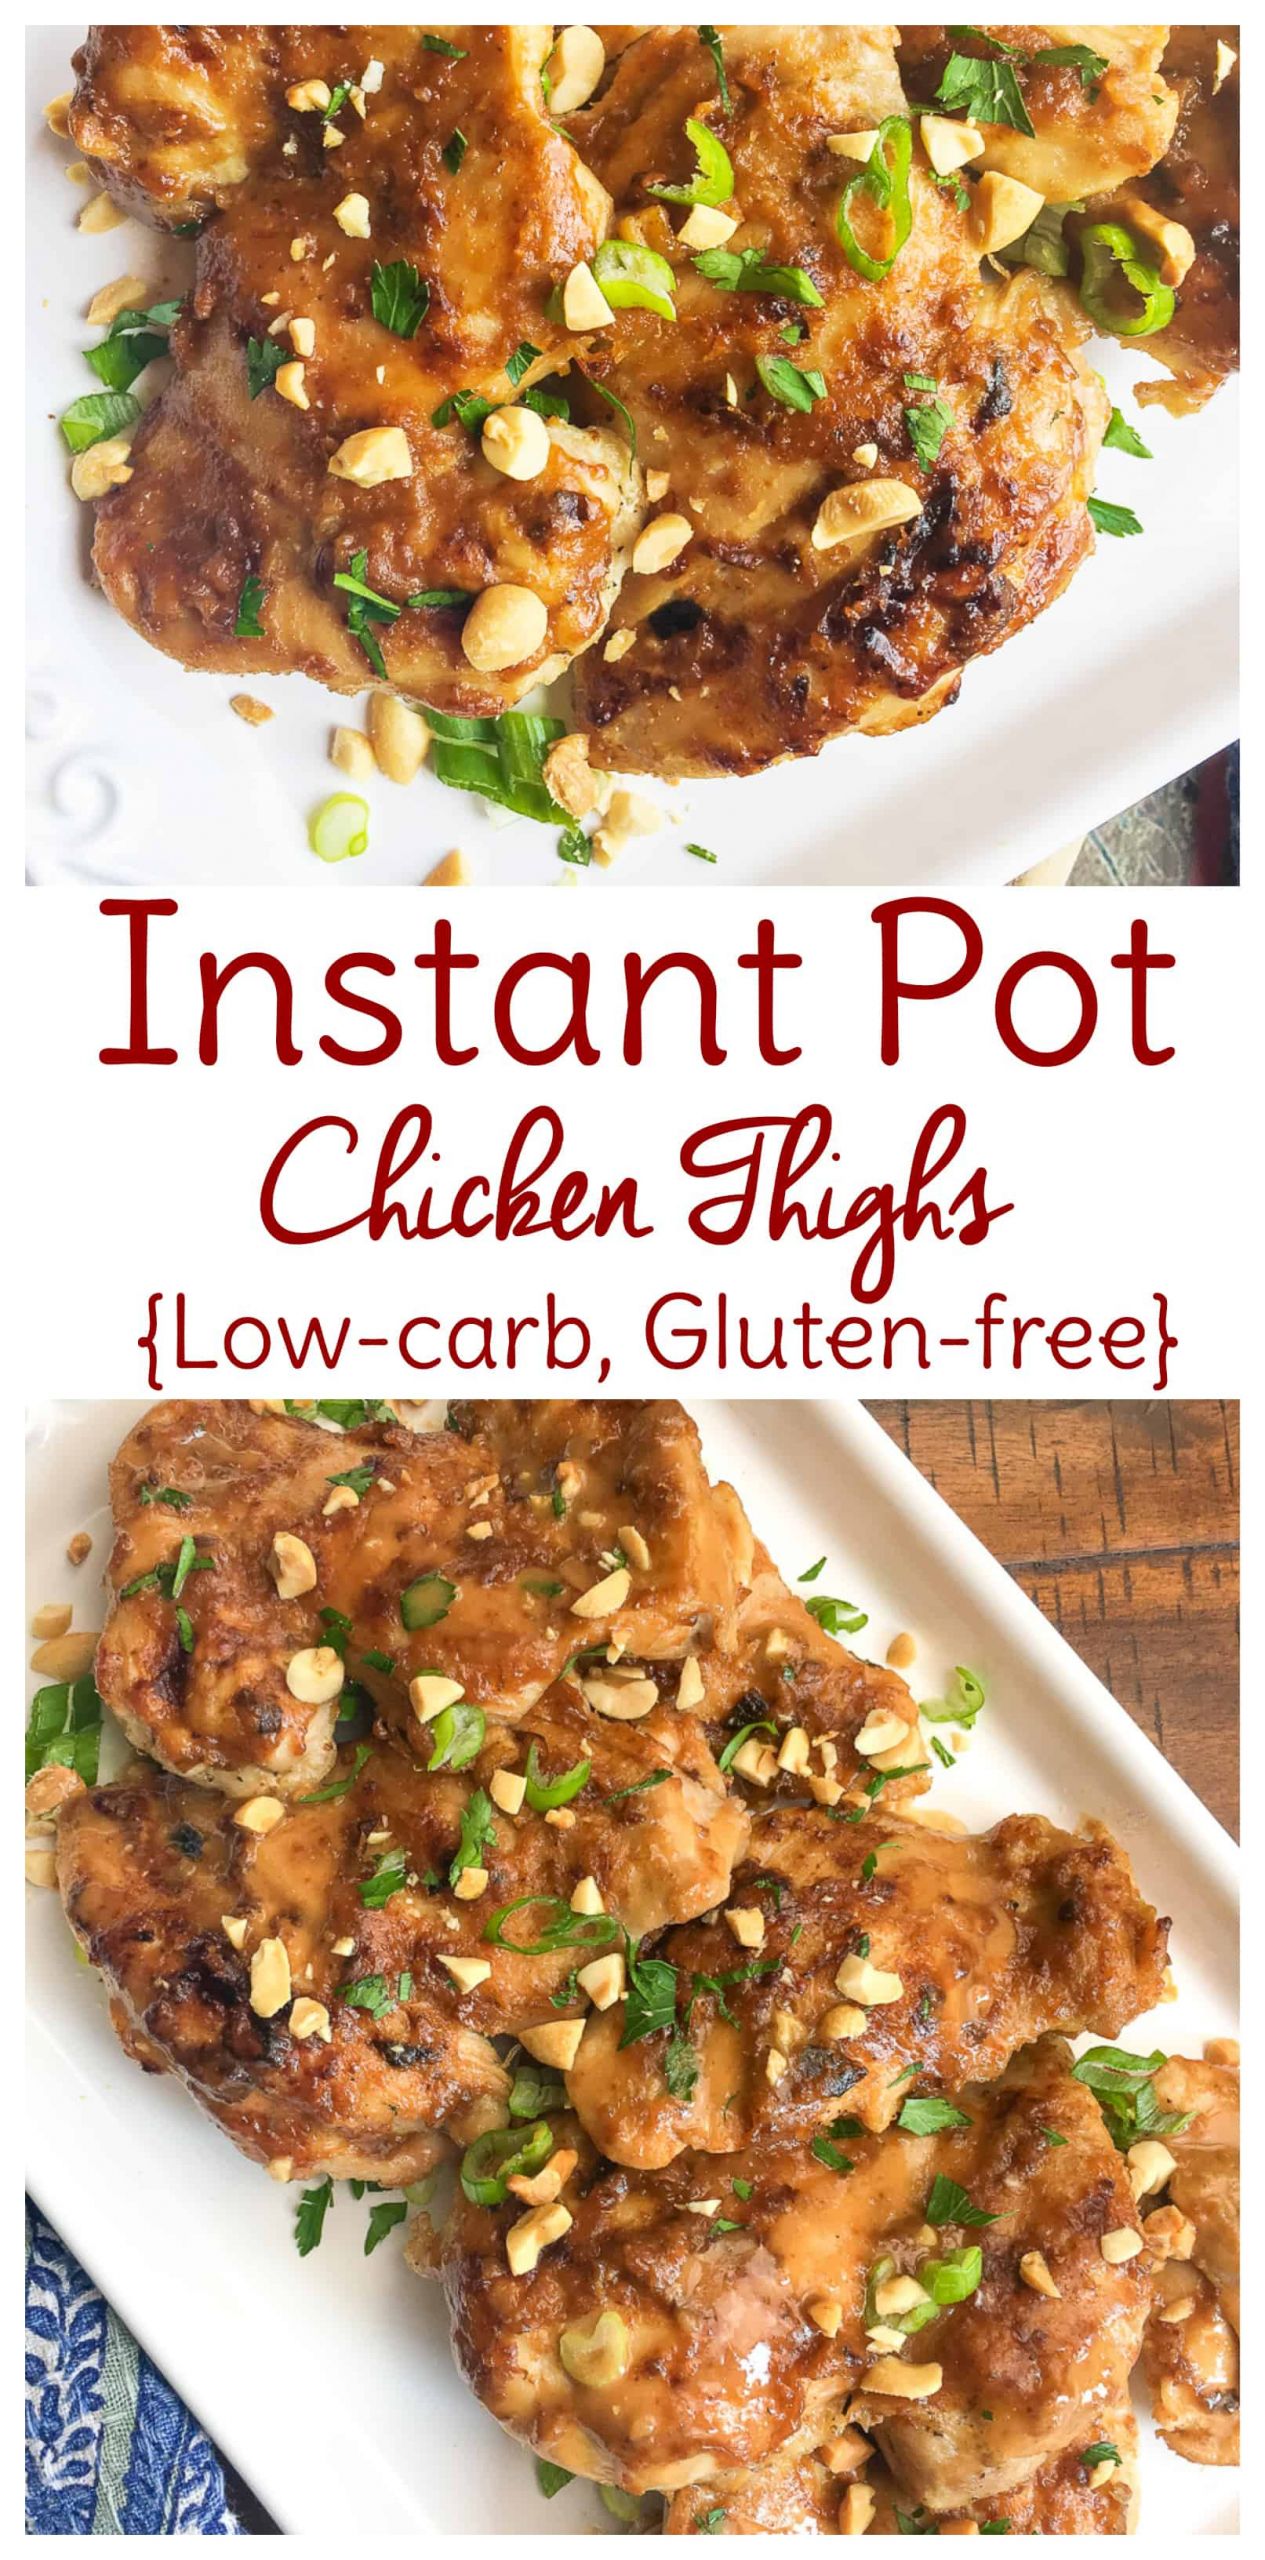 Chicken Thighs Instant Pot Keto
 Asian Style Instant Pot Chicken Thigh Recipe